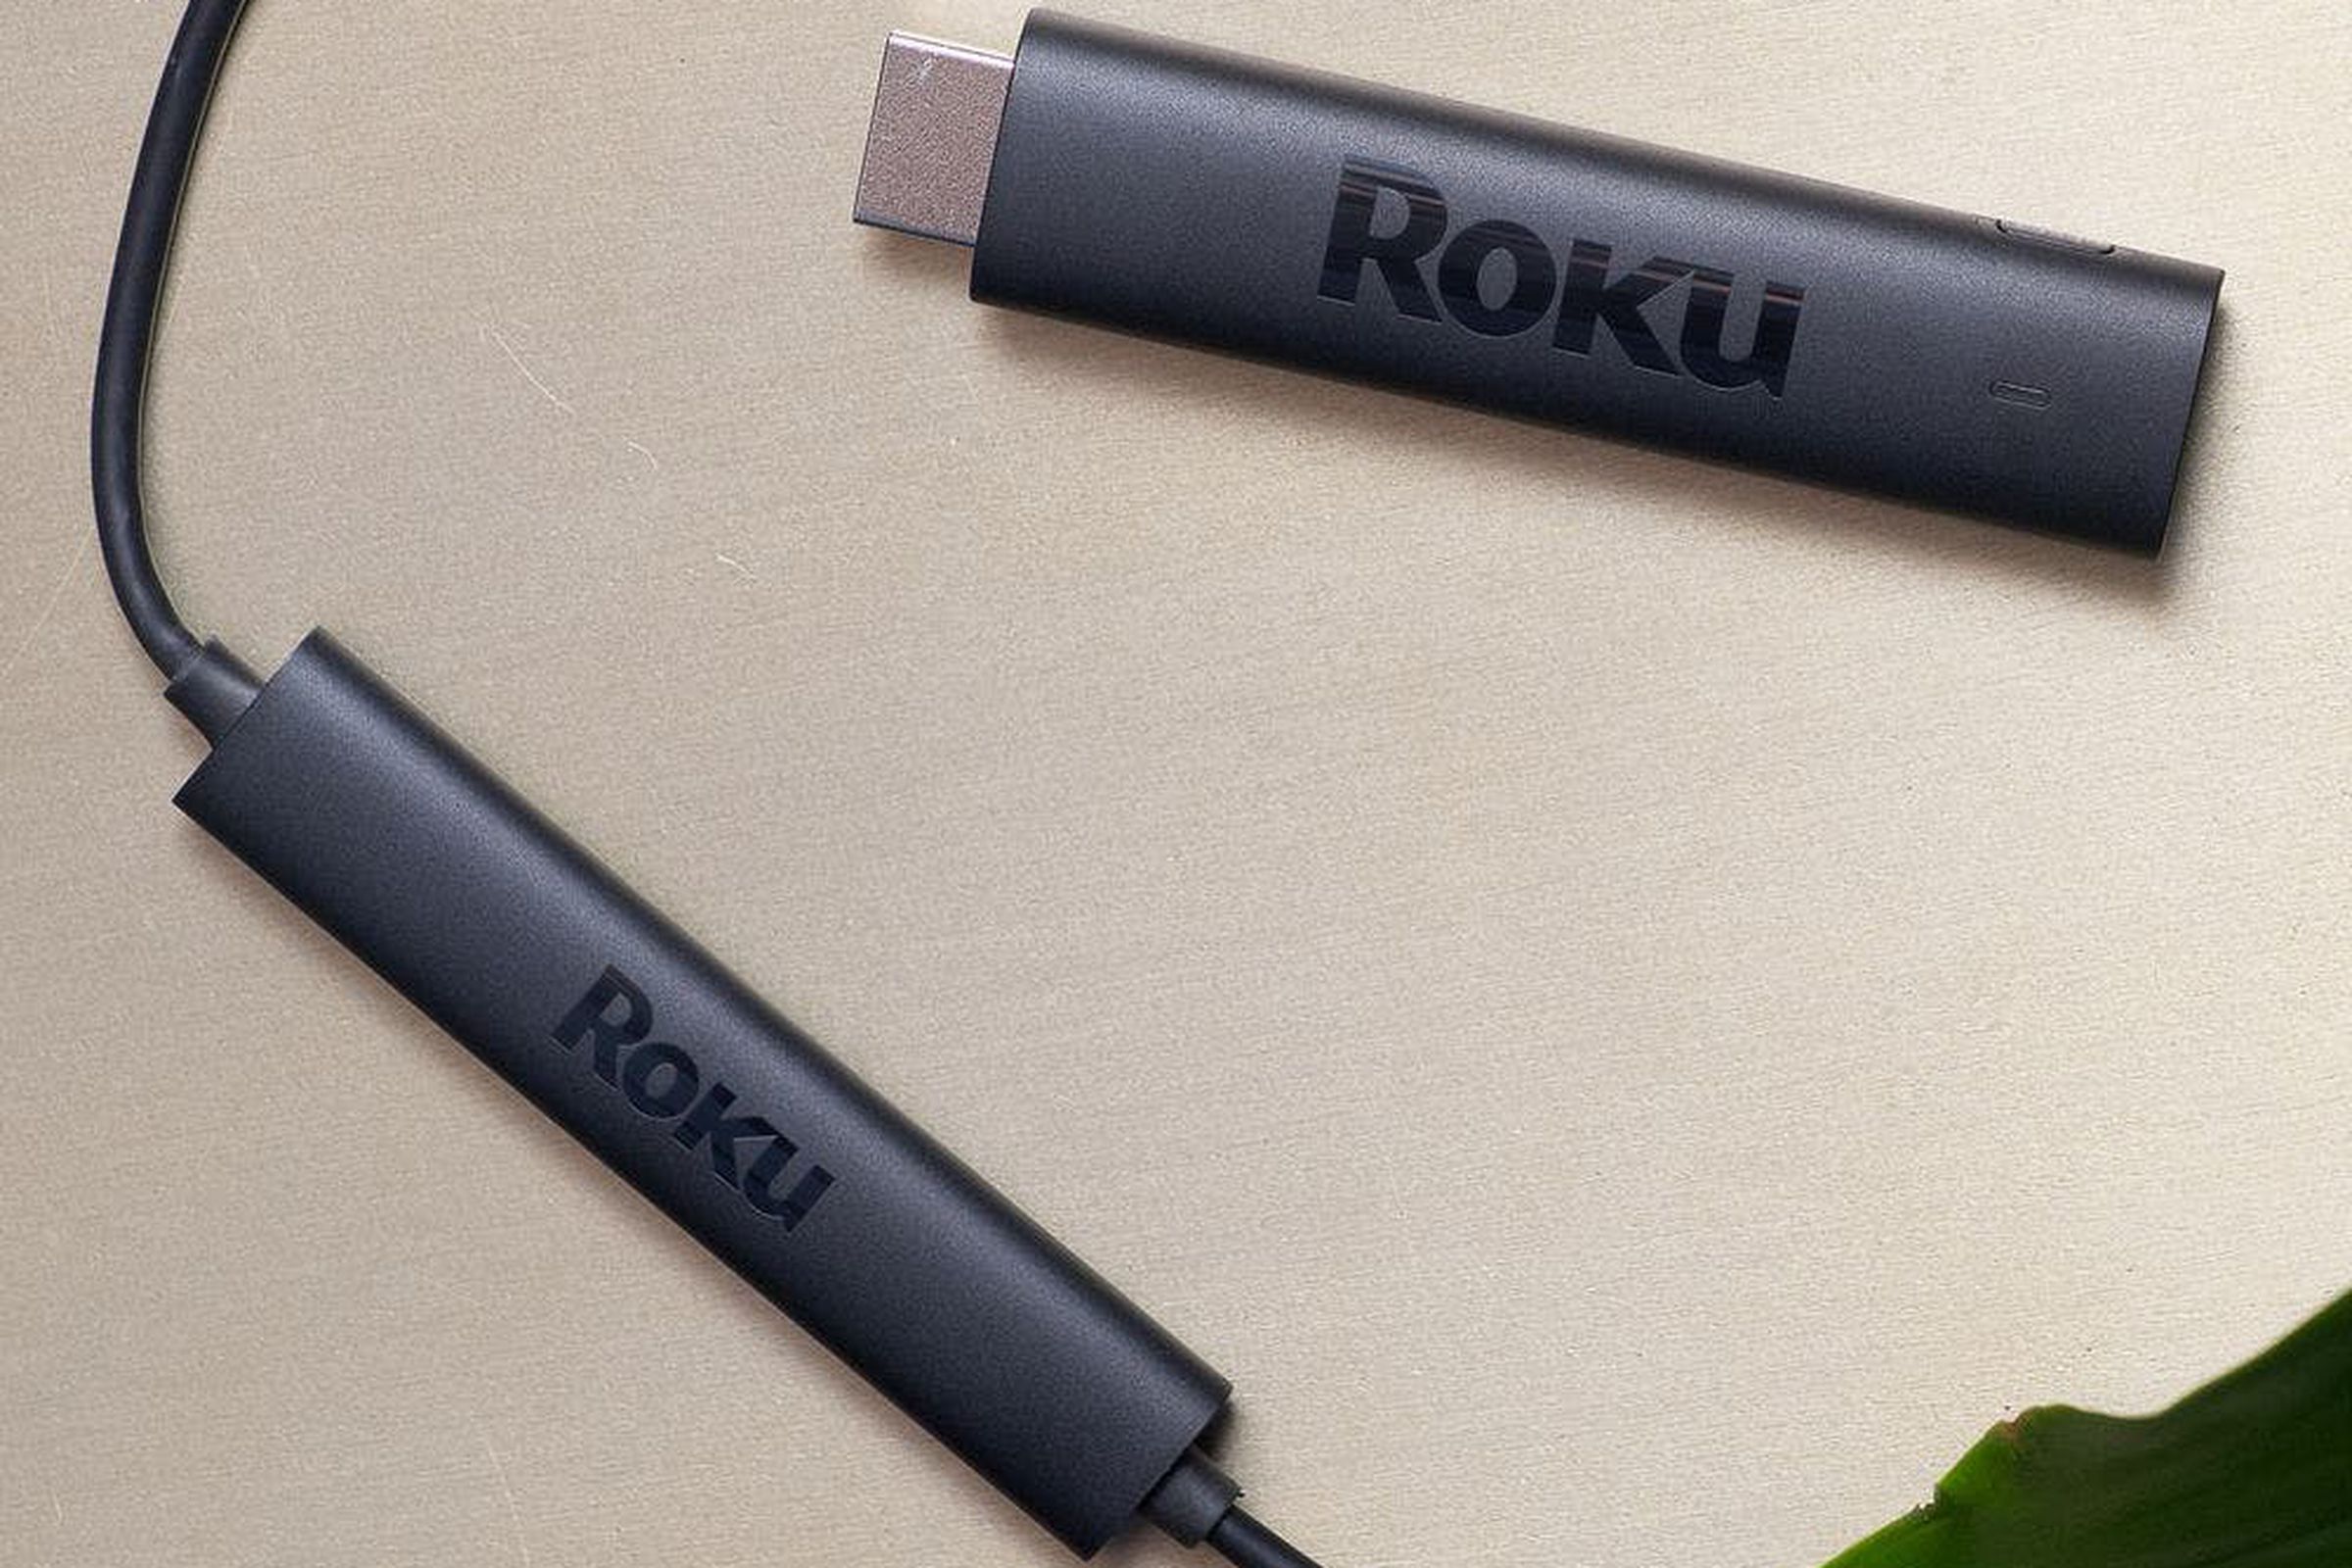 Roku’s Streaming Stick 4K lying on a table.